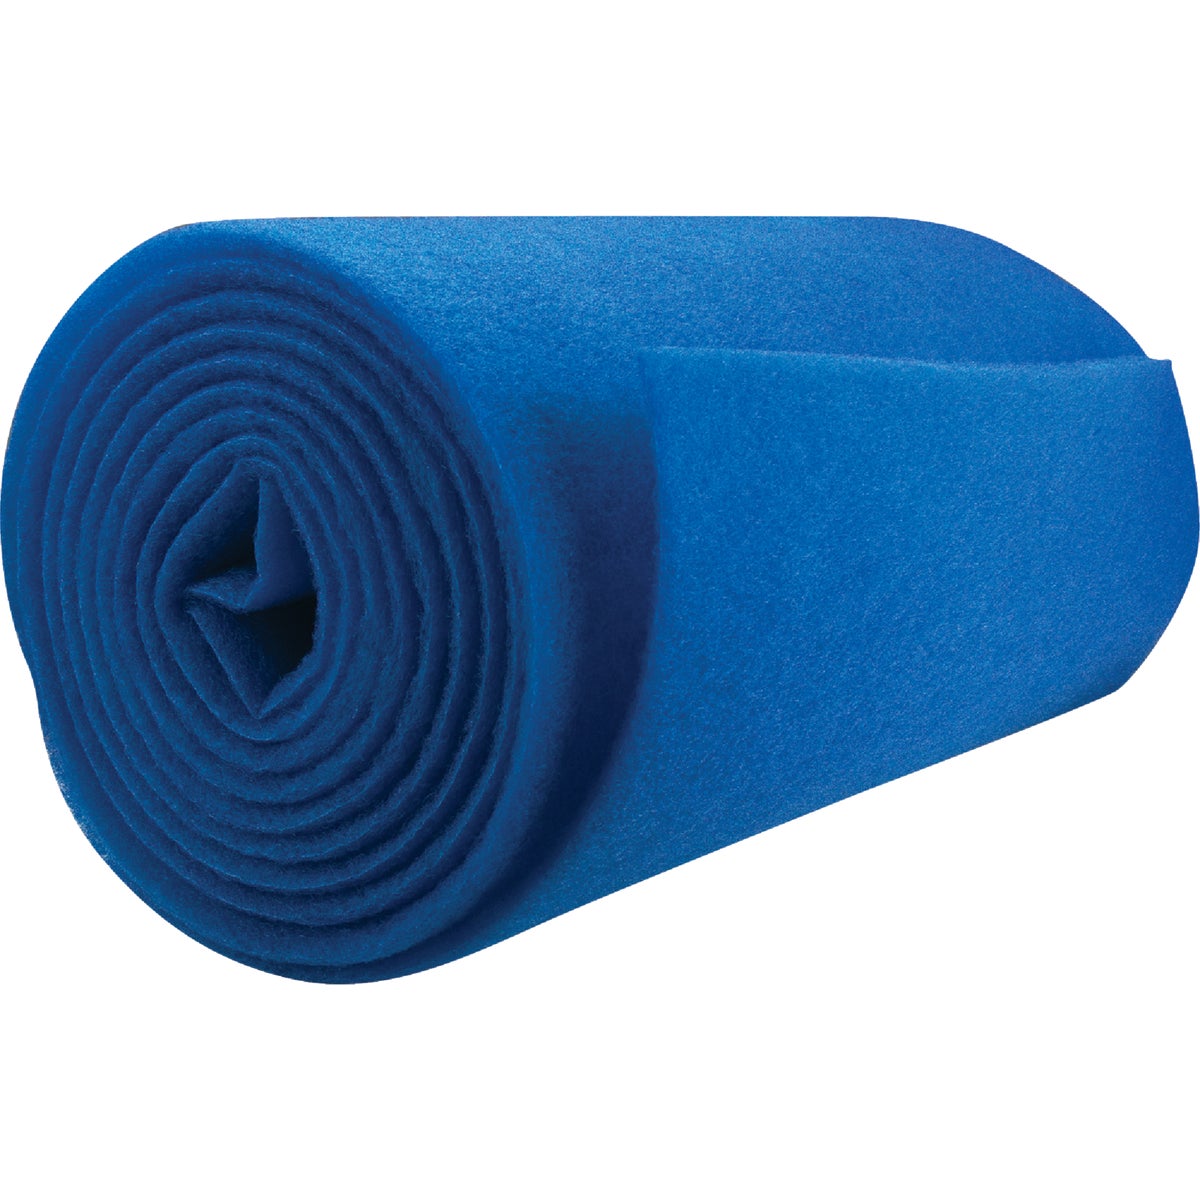 Item 436496, Synthetic bulk Service Roll.  Cut-To-Fit and ready-to-install filter pad.